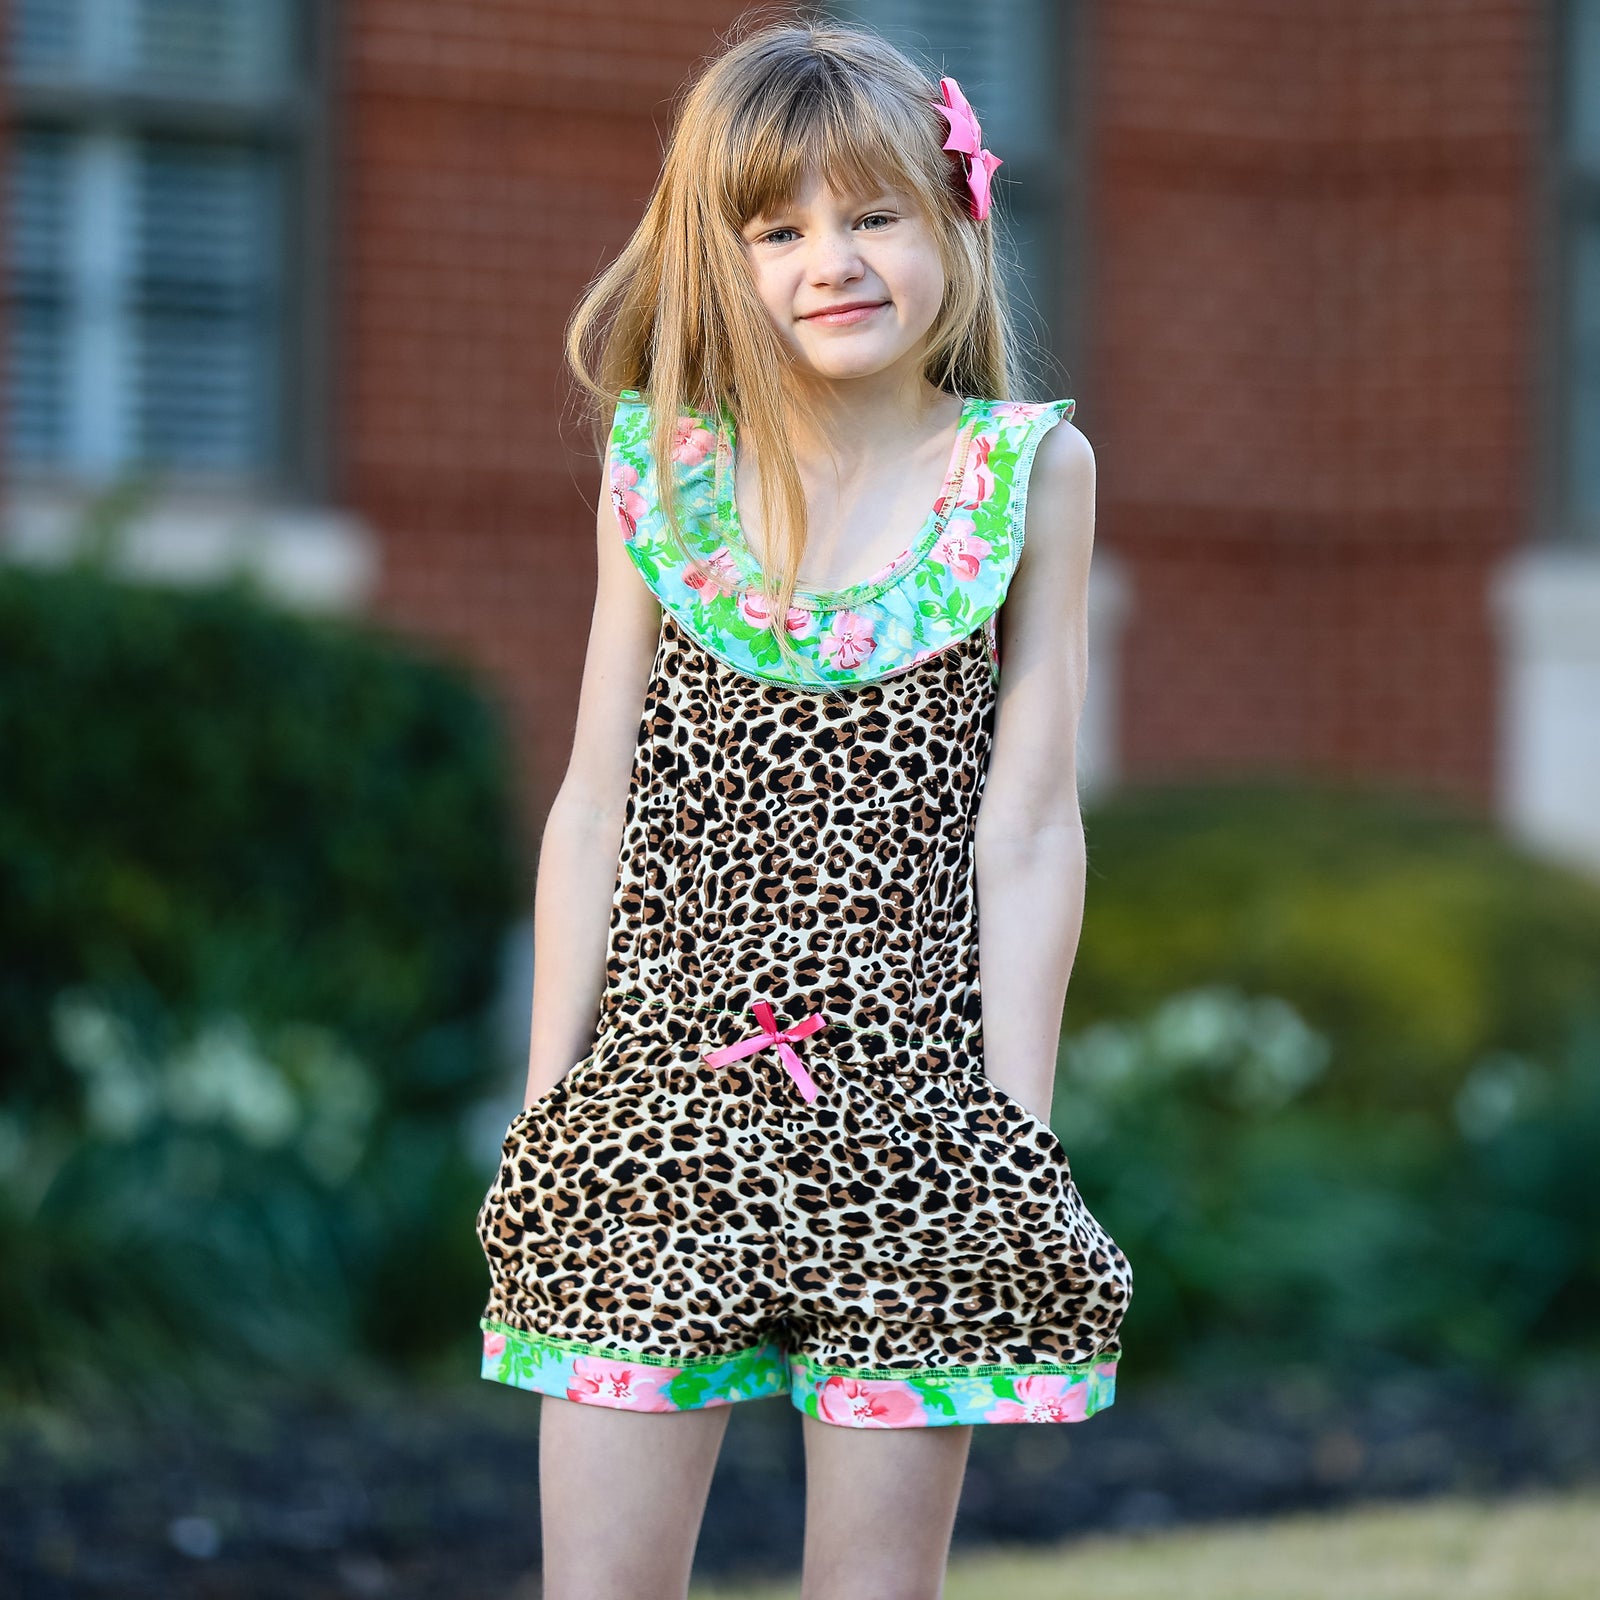 Leopard Floral Spring Summer One Piece Little Big Girls Jumpsuit Clothing Sizes 2/3T - 11/12 by AnnLoren